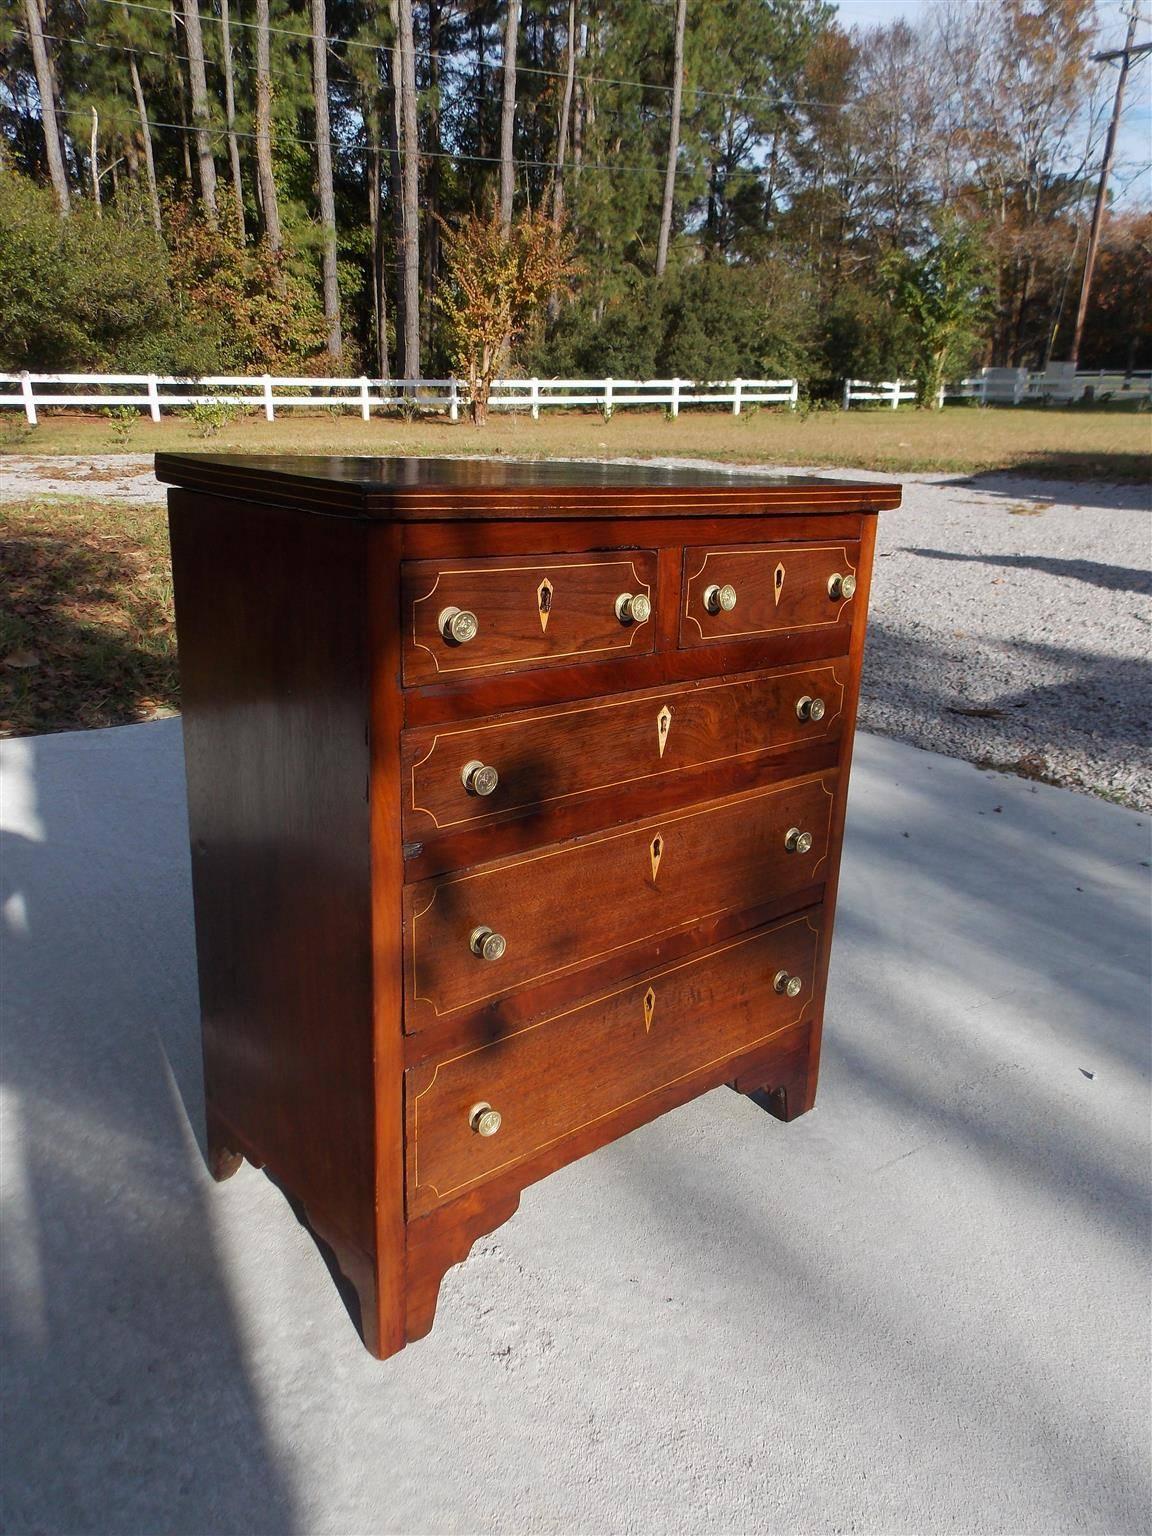 American Chippendale walnut and mahogany graduated five-drawer miniature chest of drawers with satinwood string inlay, inlaid escutcheons, original brass knobs and terminating on bracket feet. Secondary wood throughout is yellow pine, Late 18th